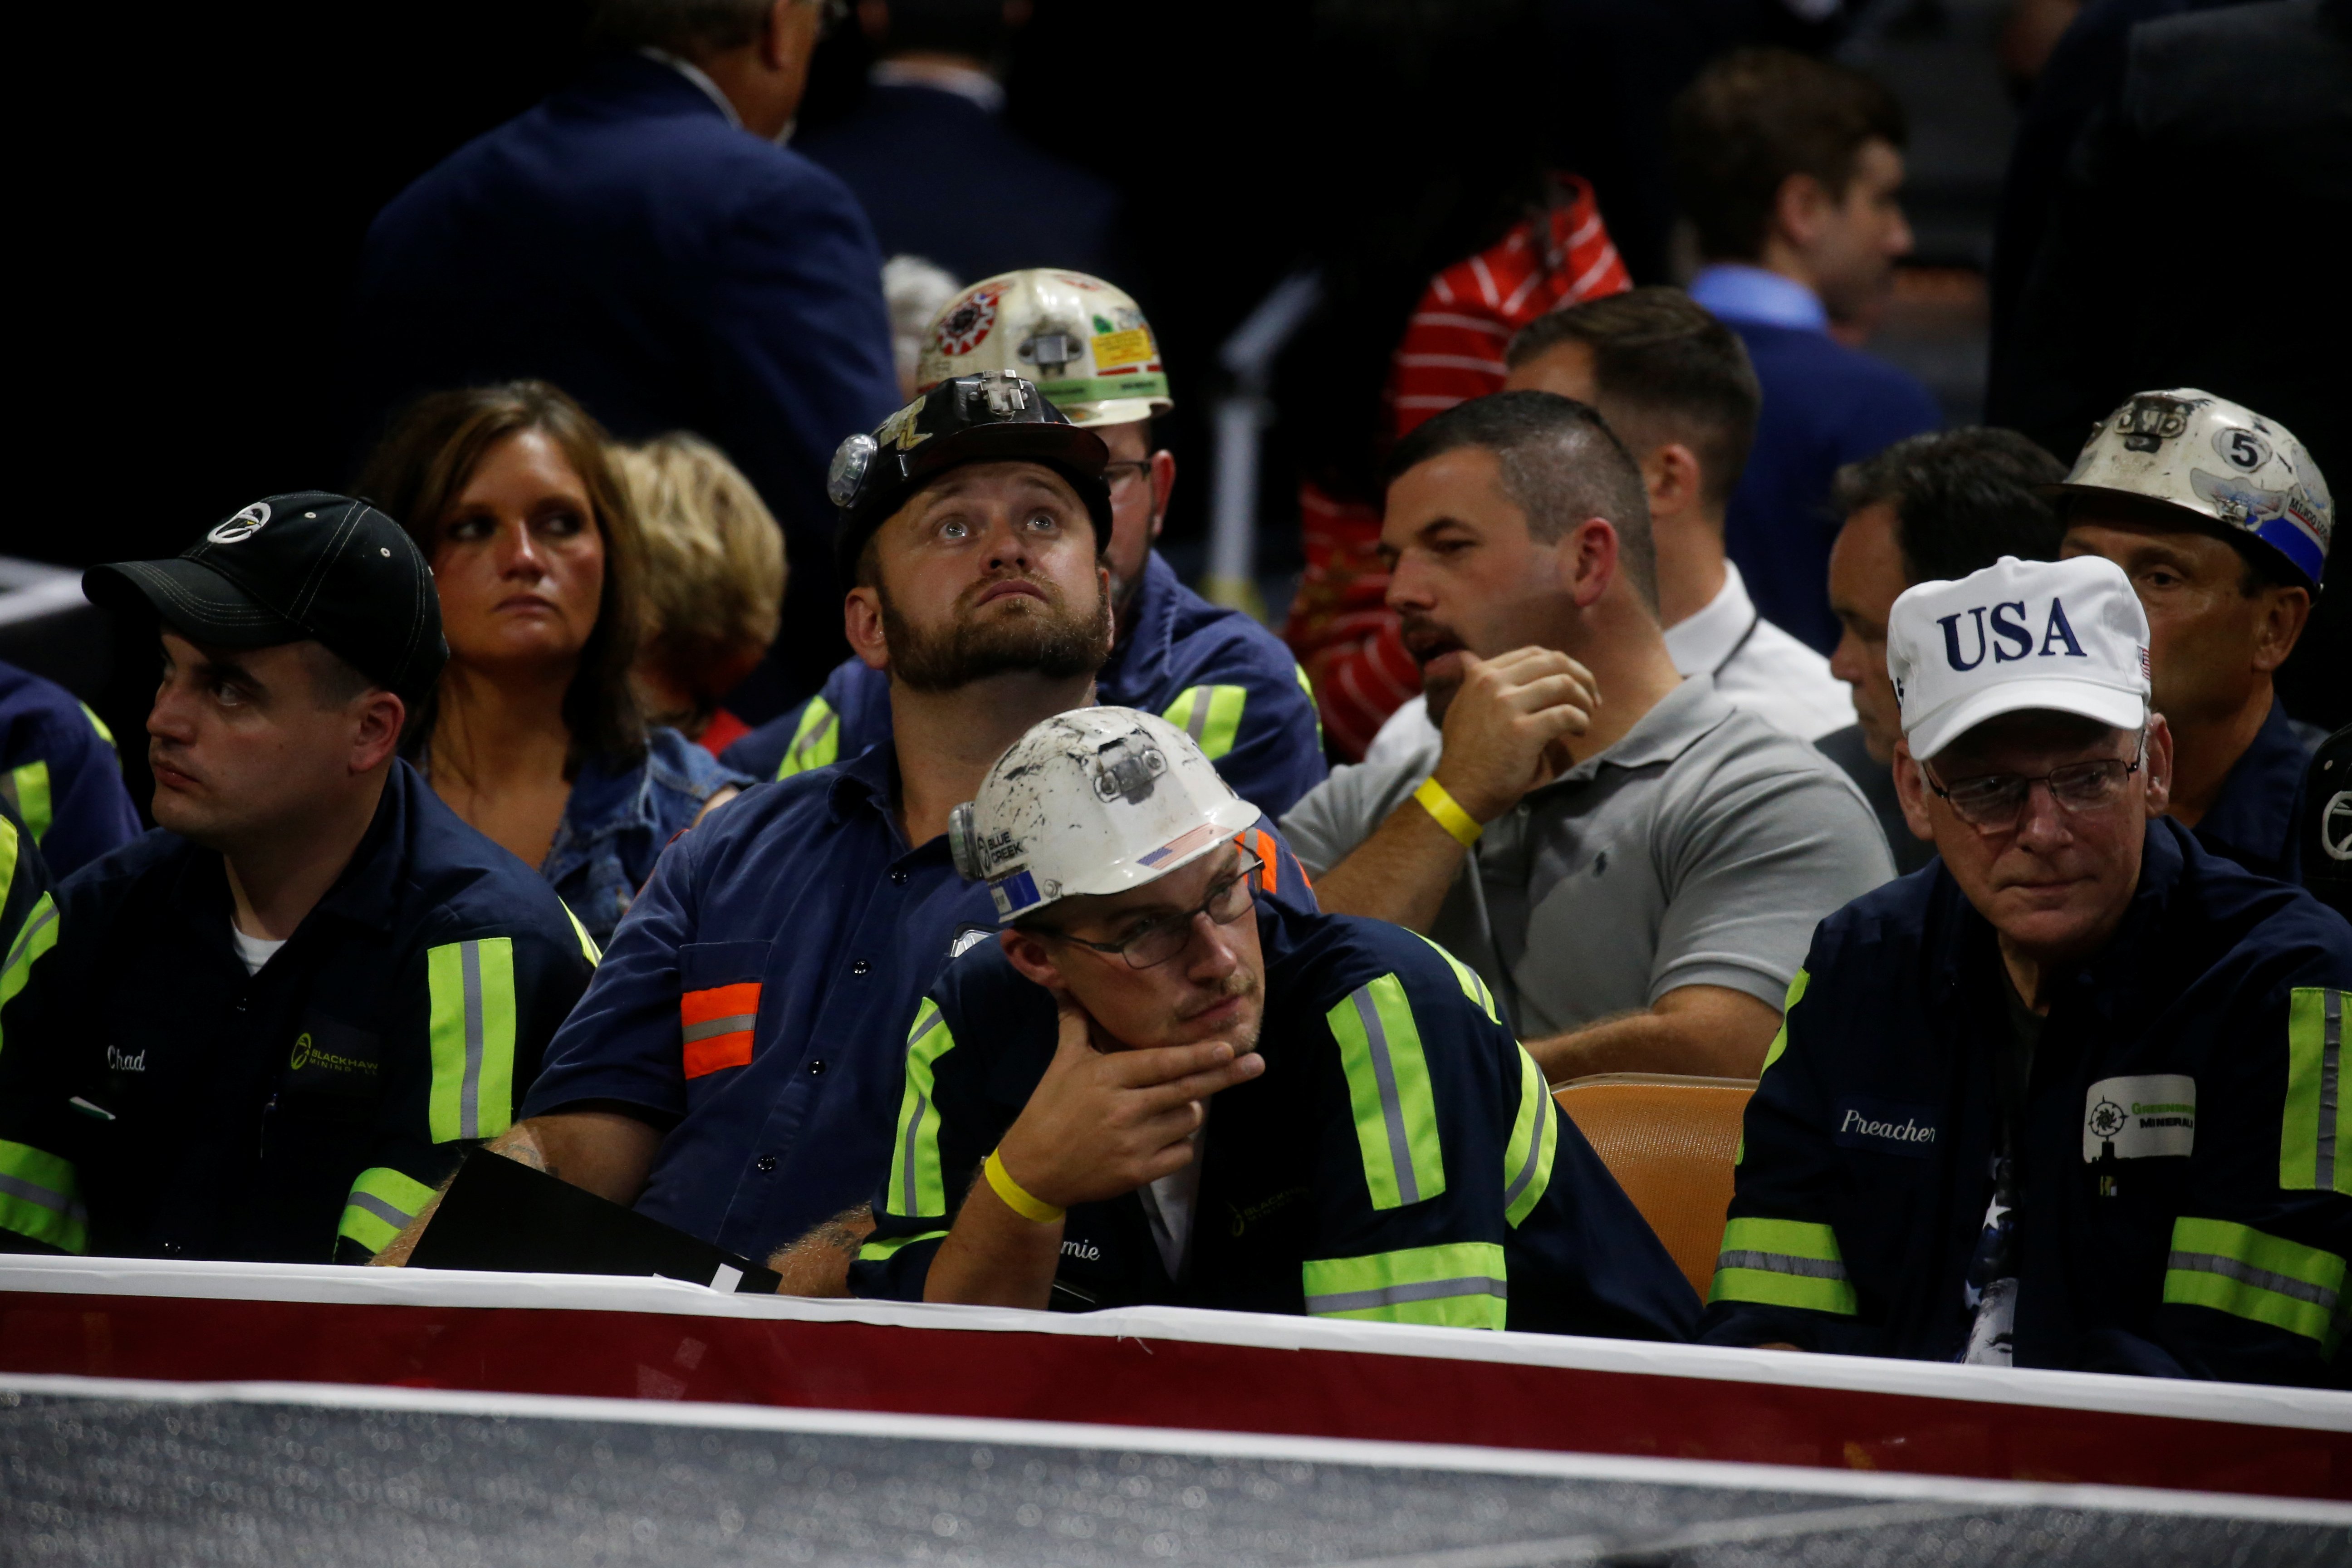 Coal miners attend a Make America Great Again rally at the Civic Center in Charleston, West Virginia, U.S., August 21, 2018. REUTERS/Leah Millis